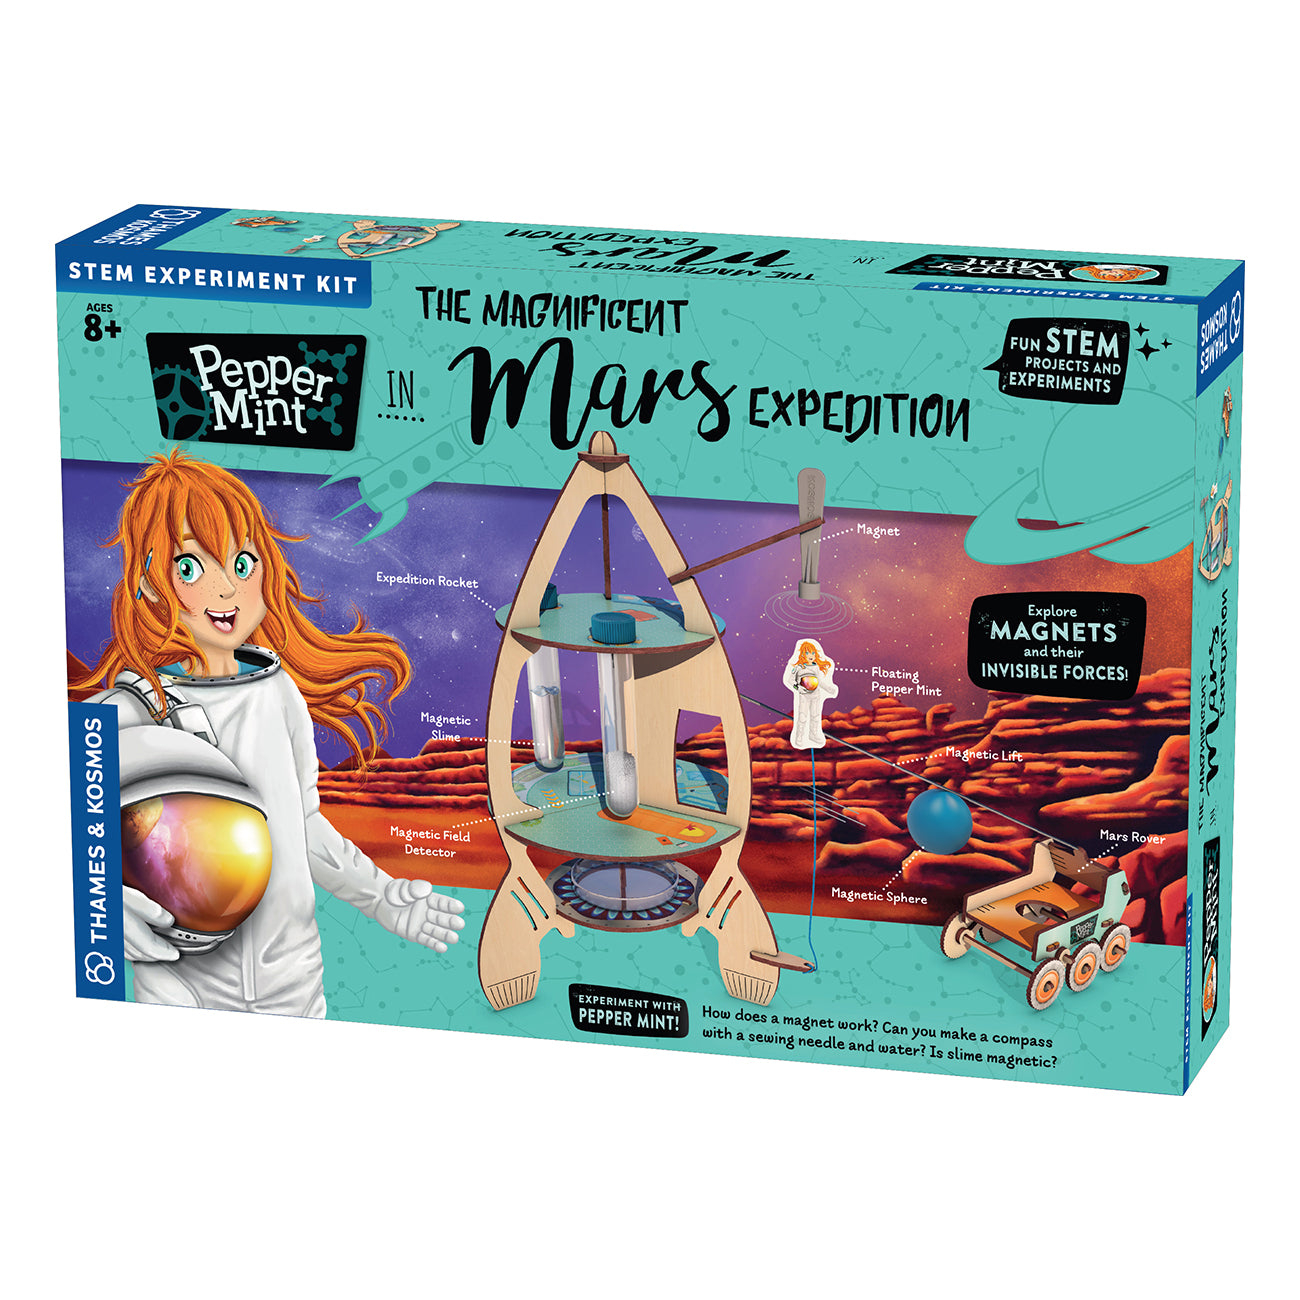 Magnificent Mars Expedition (3067968520314)